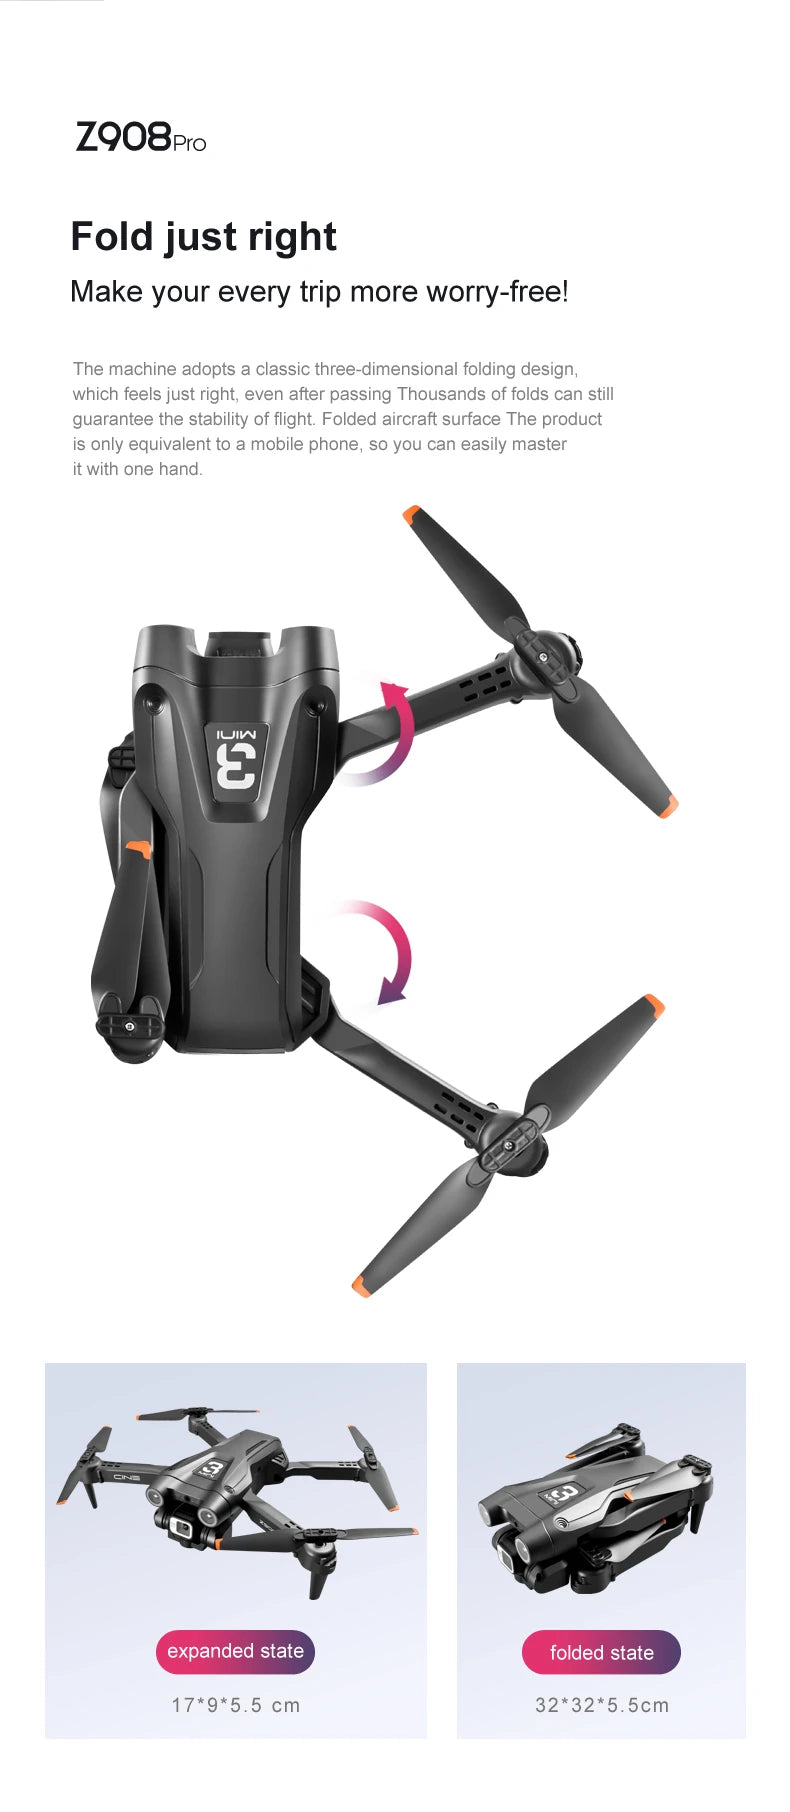 KBDFA Z908 Pro Drone, z908pro fold just right make your every trip more worry